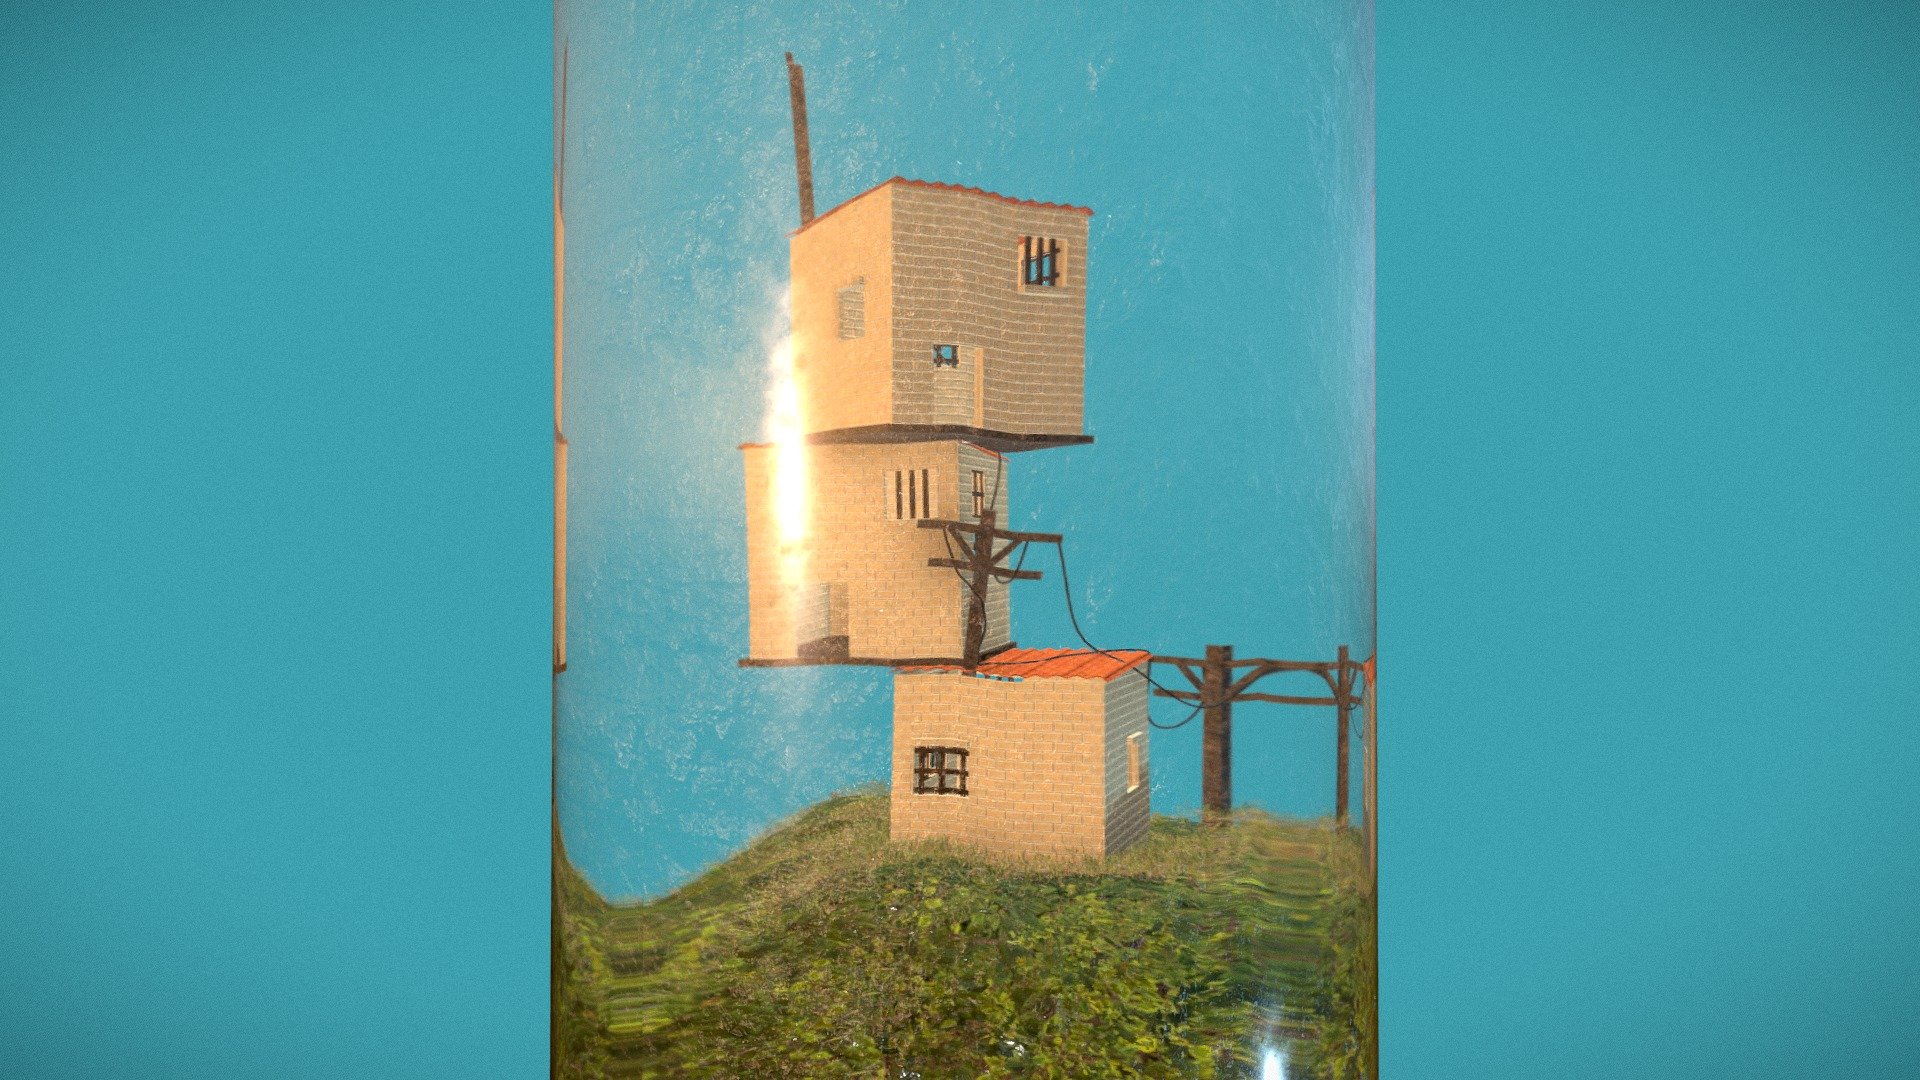 Stacked Houses in a Test Tube Diorama